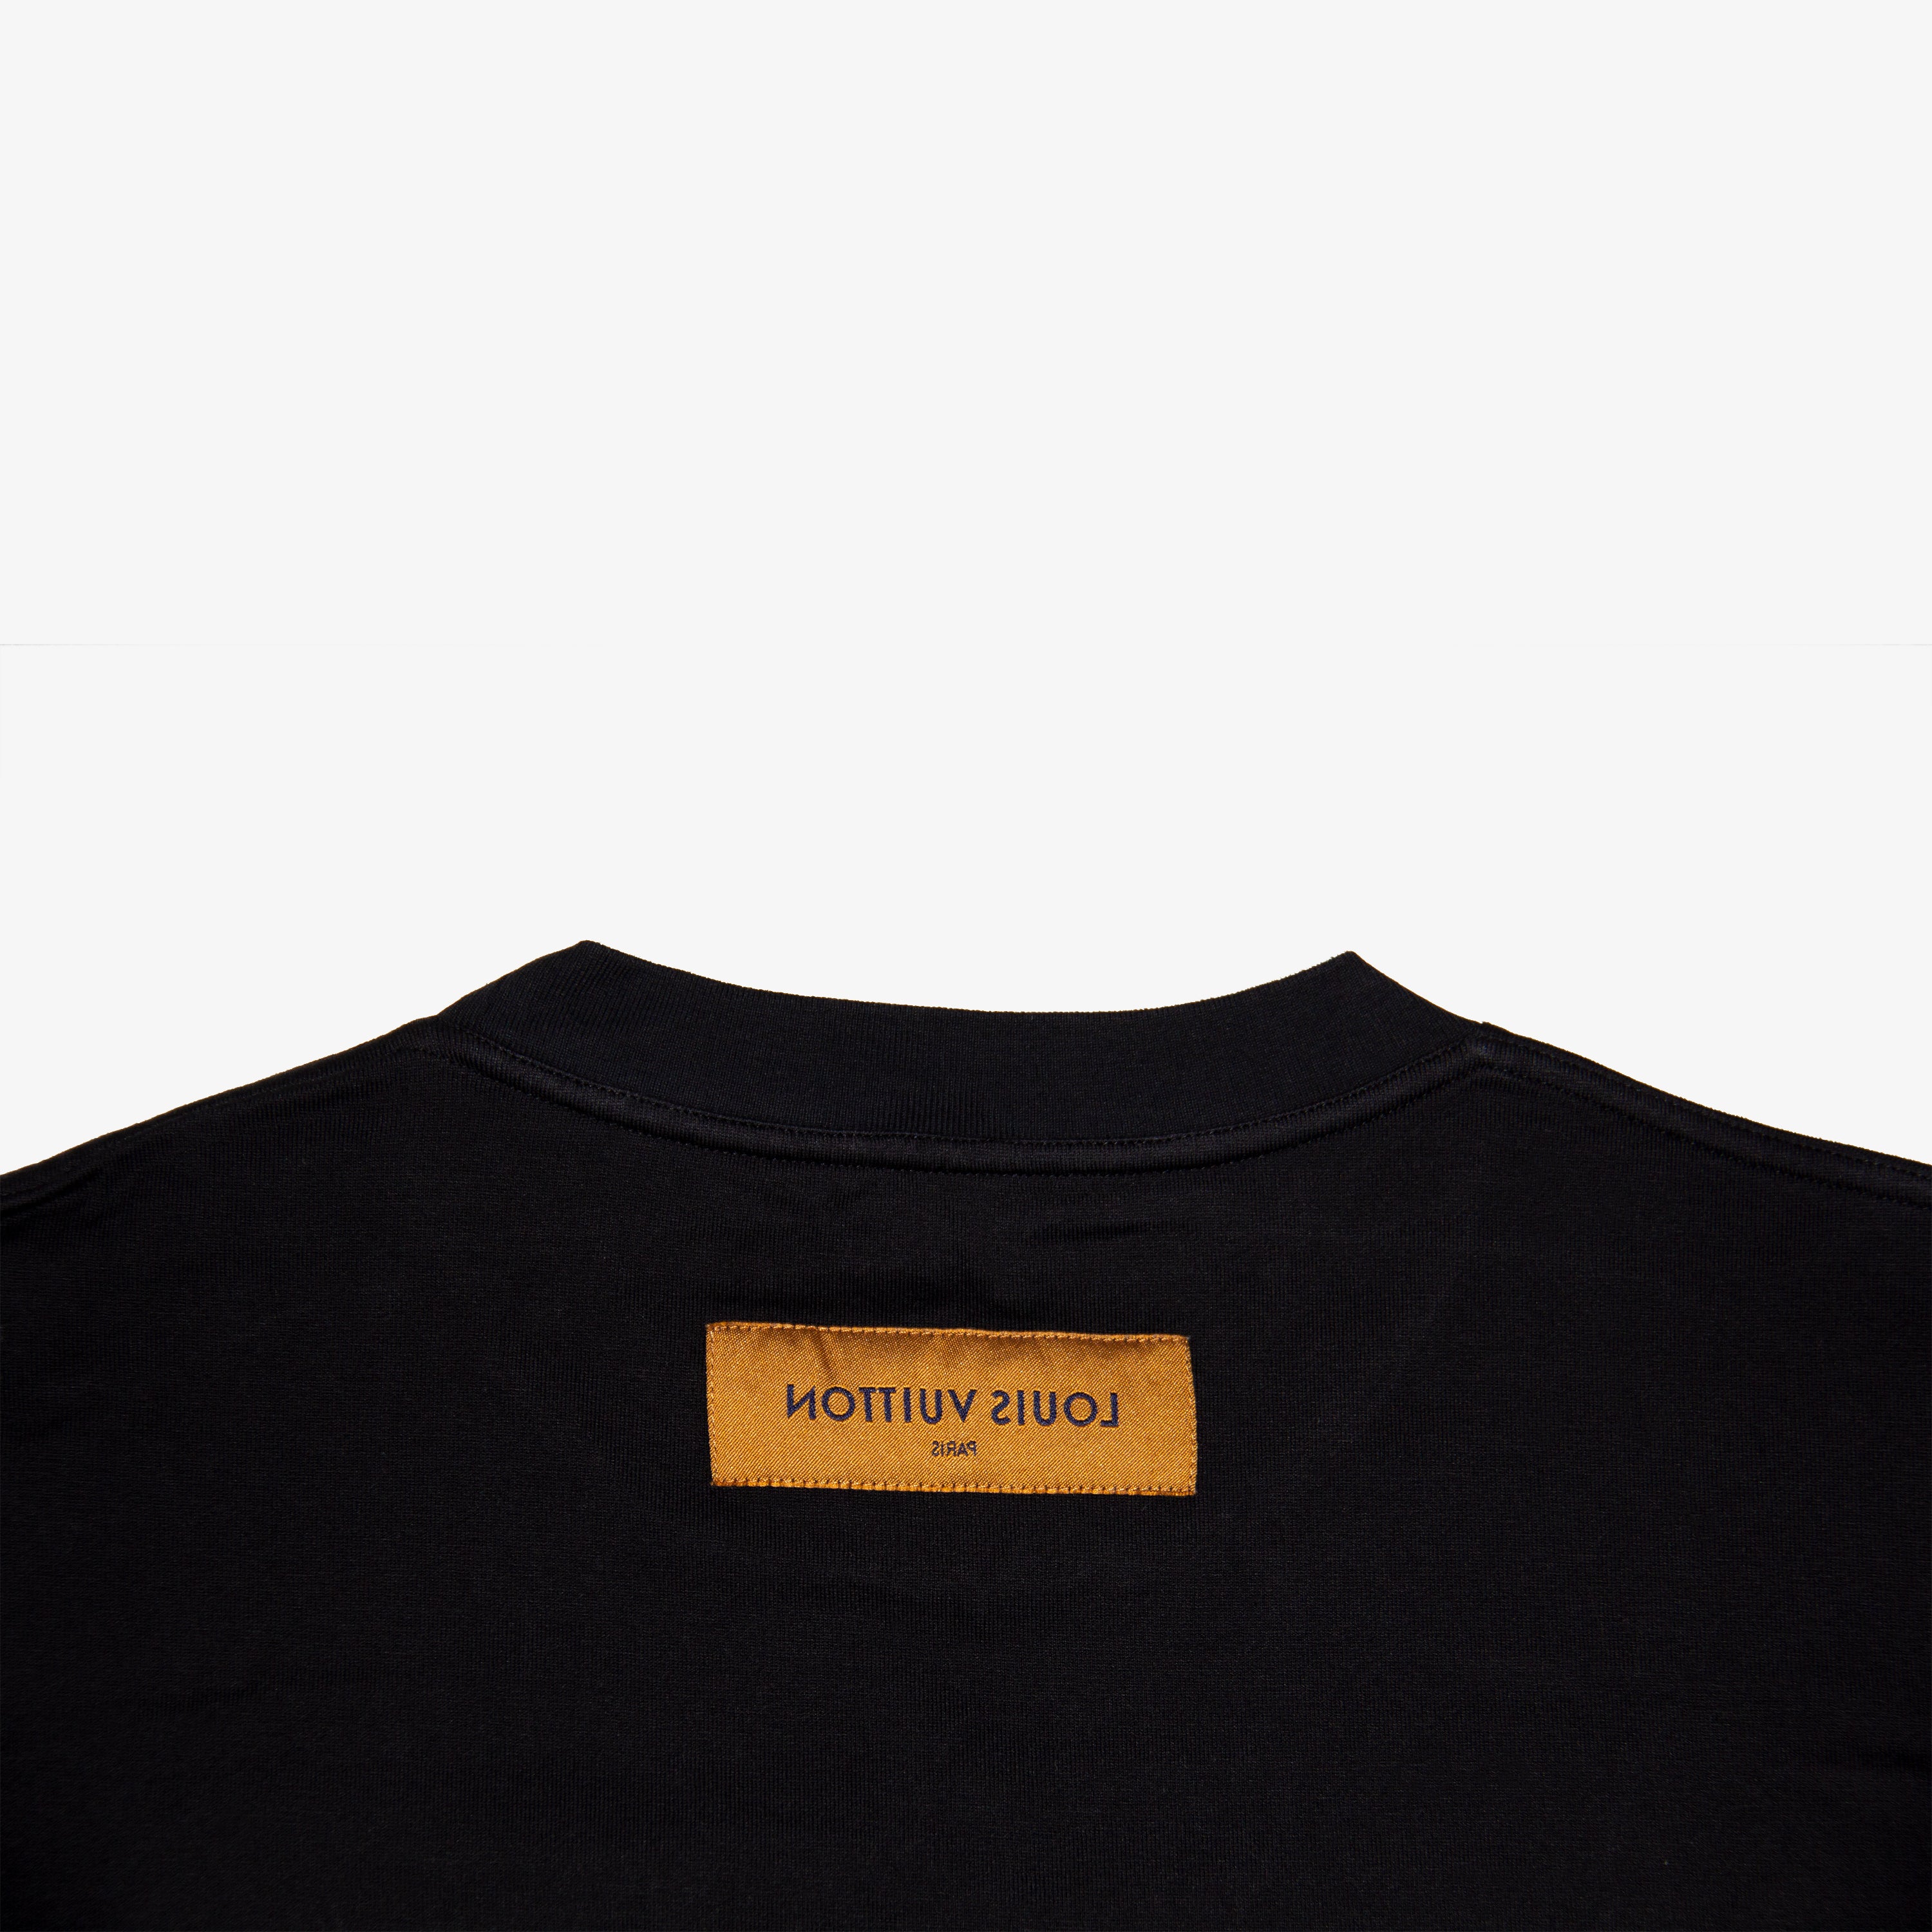 Louis Vuitton Connect the dots stitch print embroidered sweatshirt